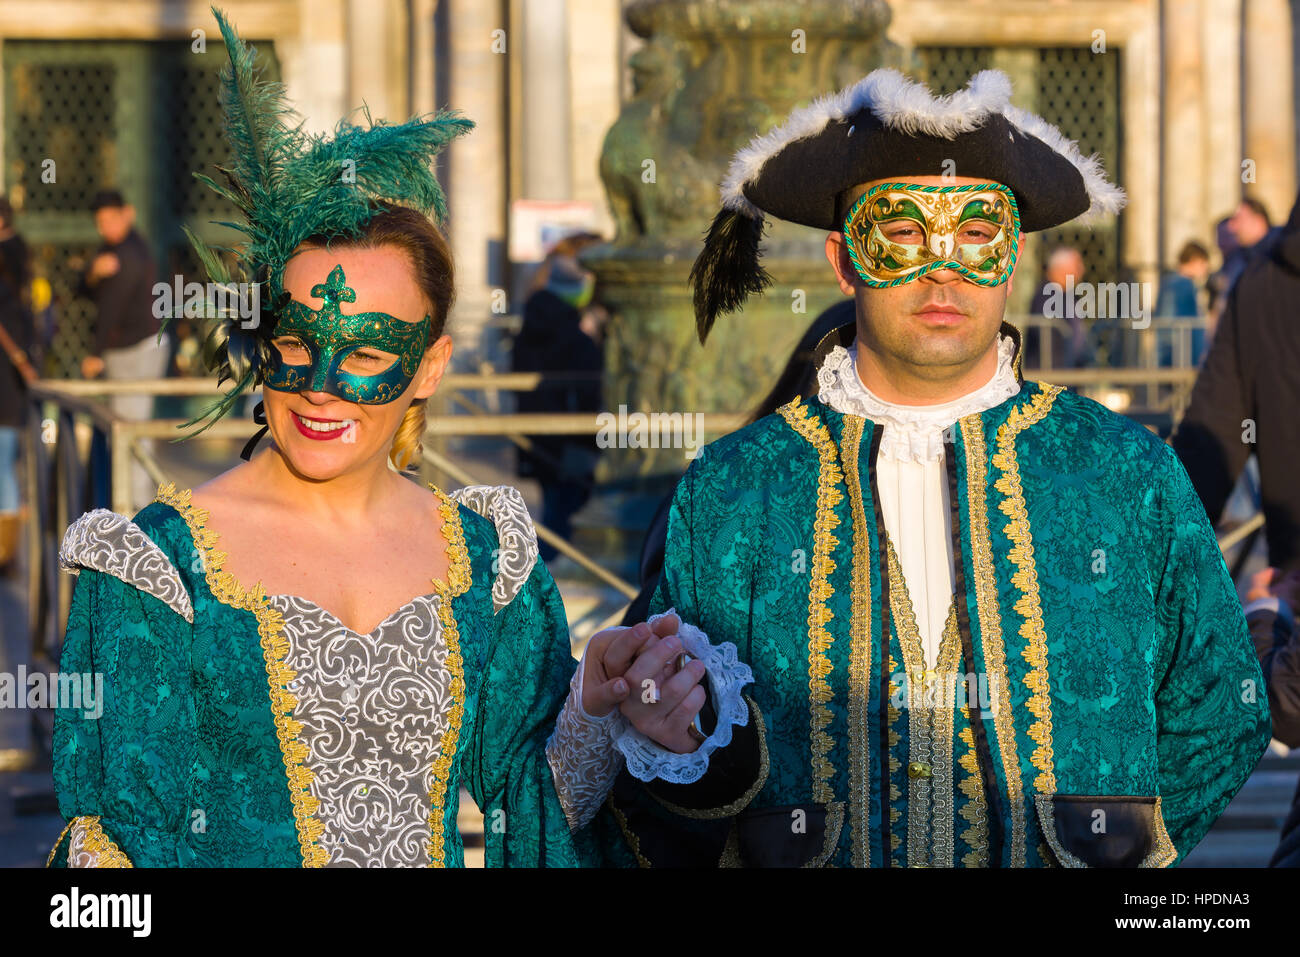 A man and a woman are seen walking through St Mark's square during the 2017 Venice Carnival Stock Photo